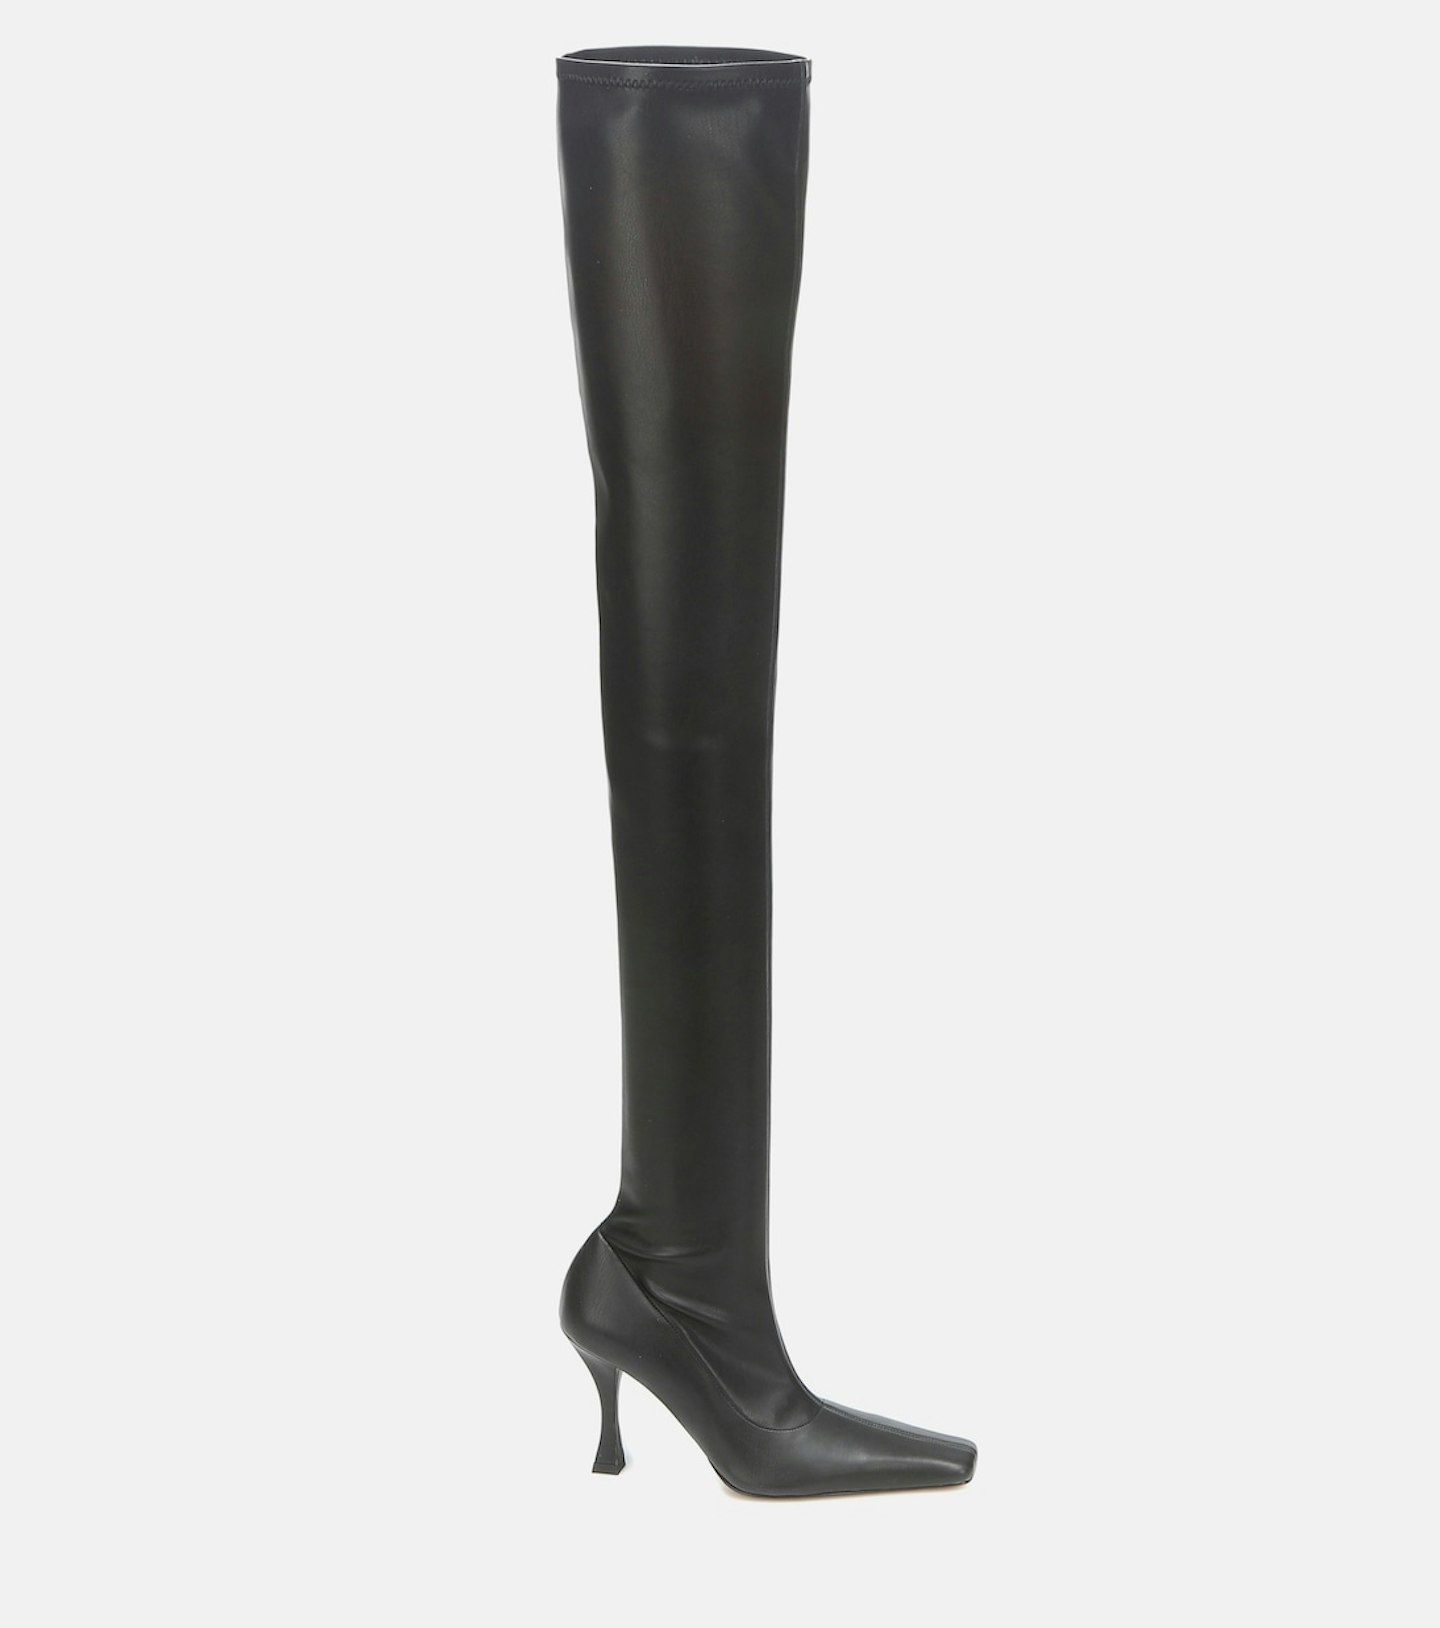 Proenza Schouler, Faux Leather Over-The-Knee Boots